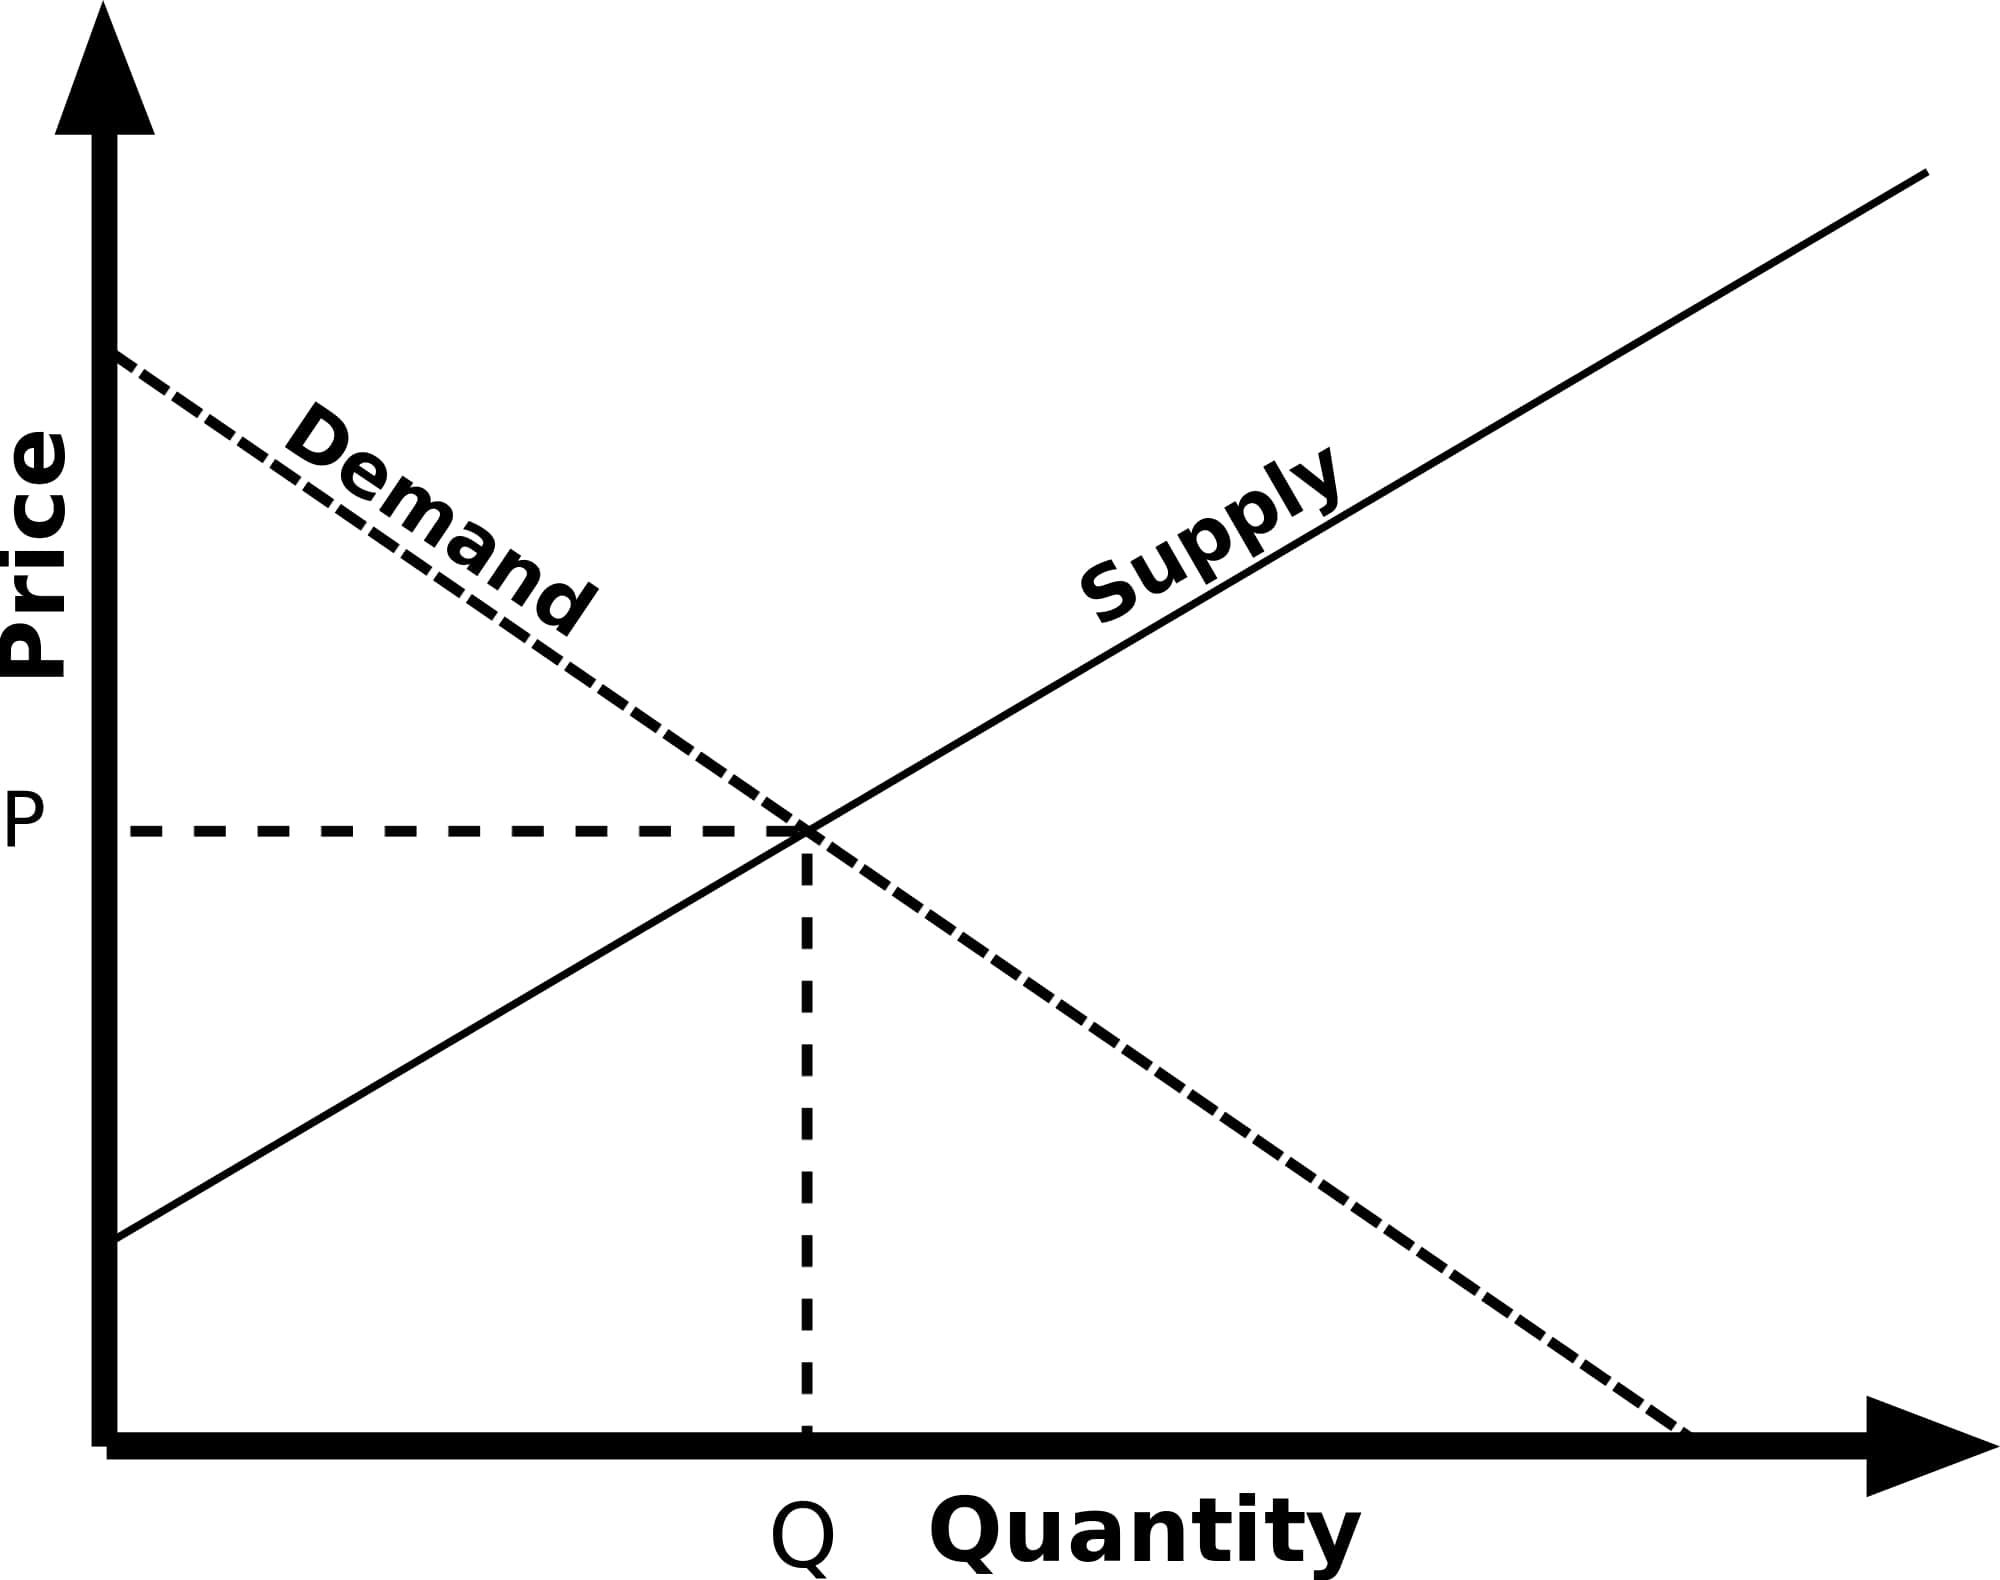 The original Supply and Demand graph